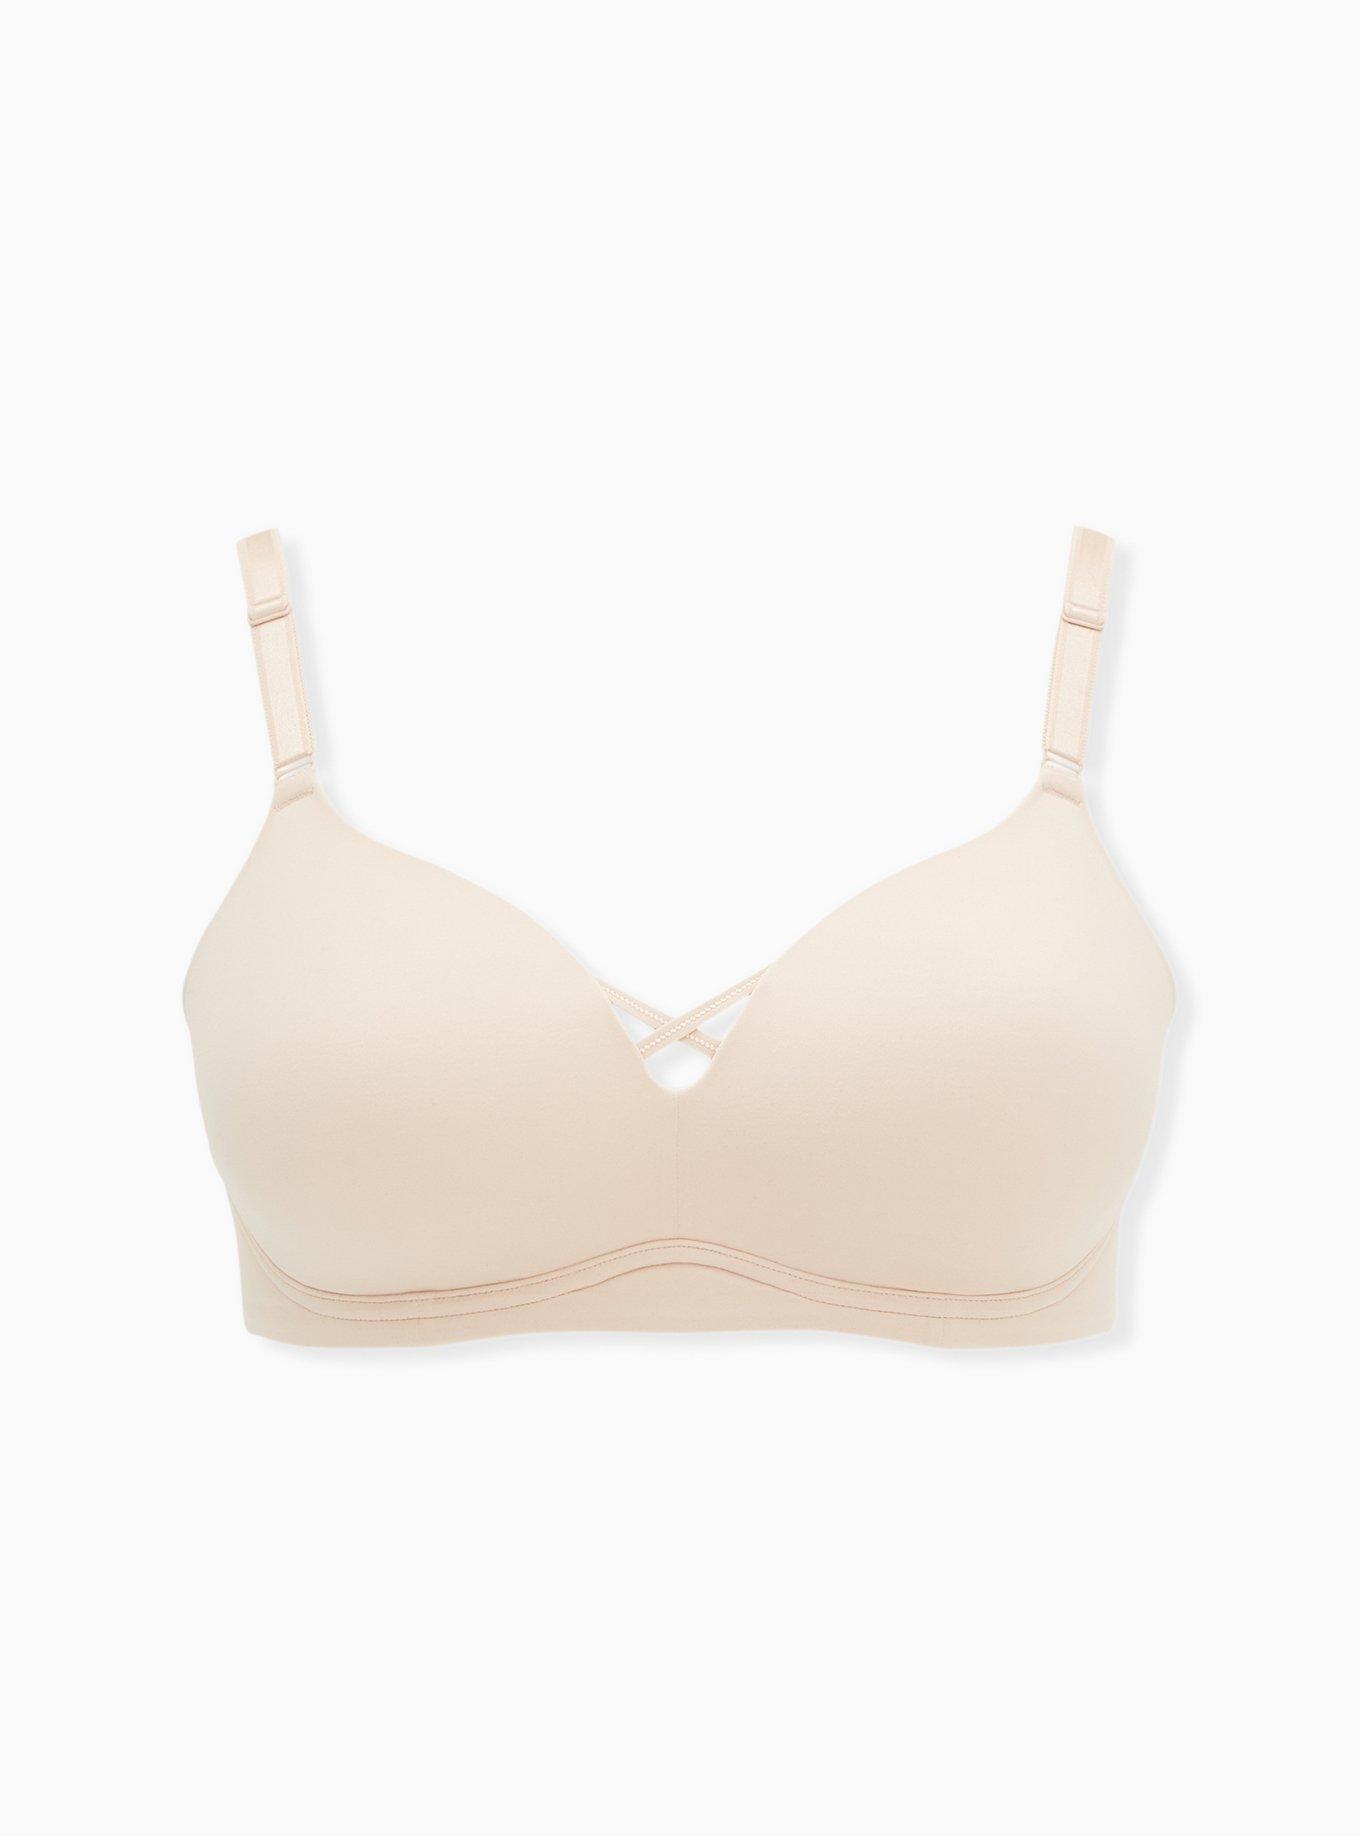 Choosing Between Comfort and Fashion: The Enigma of Push-Up Bras